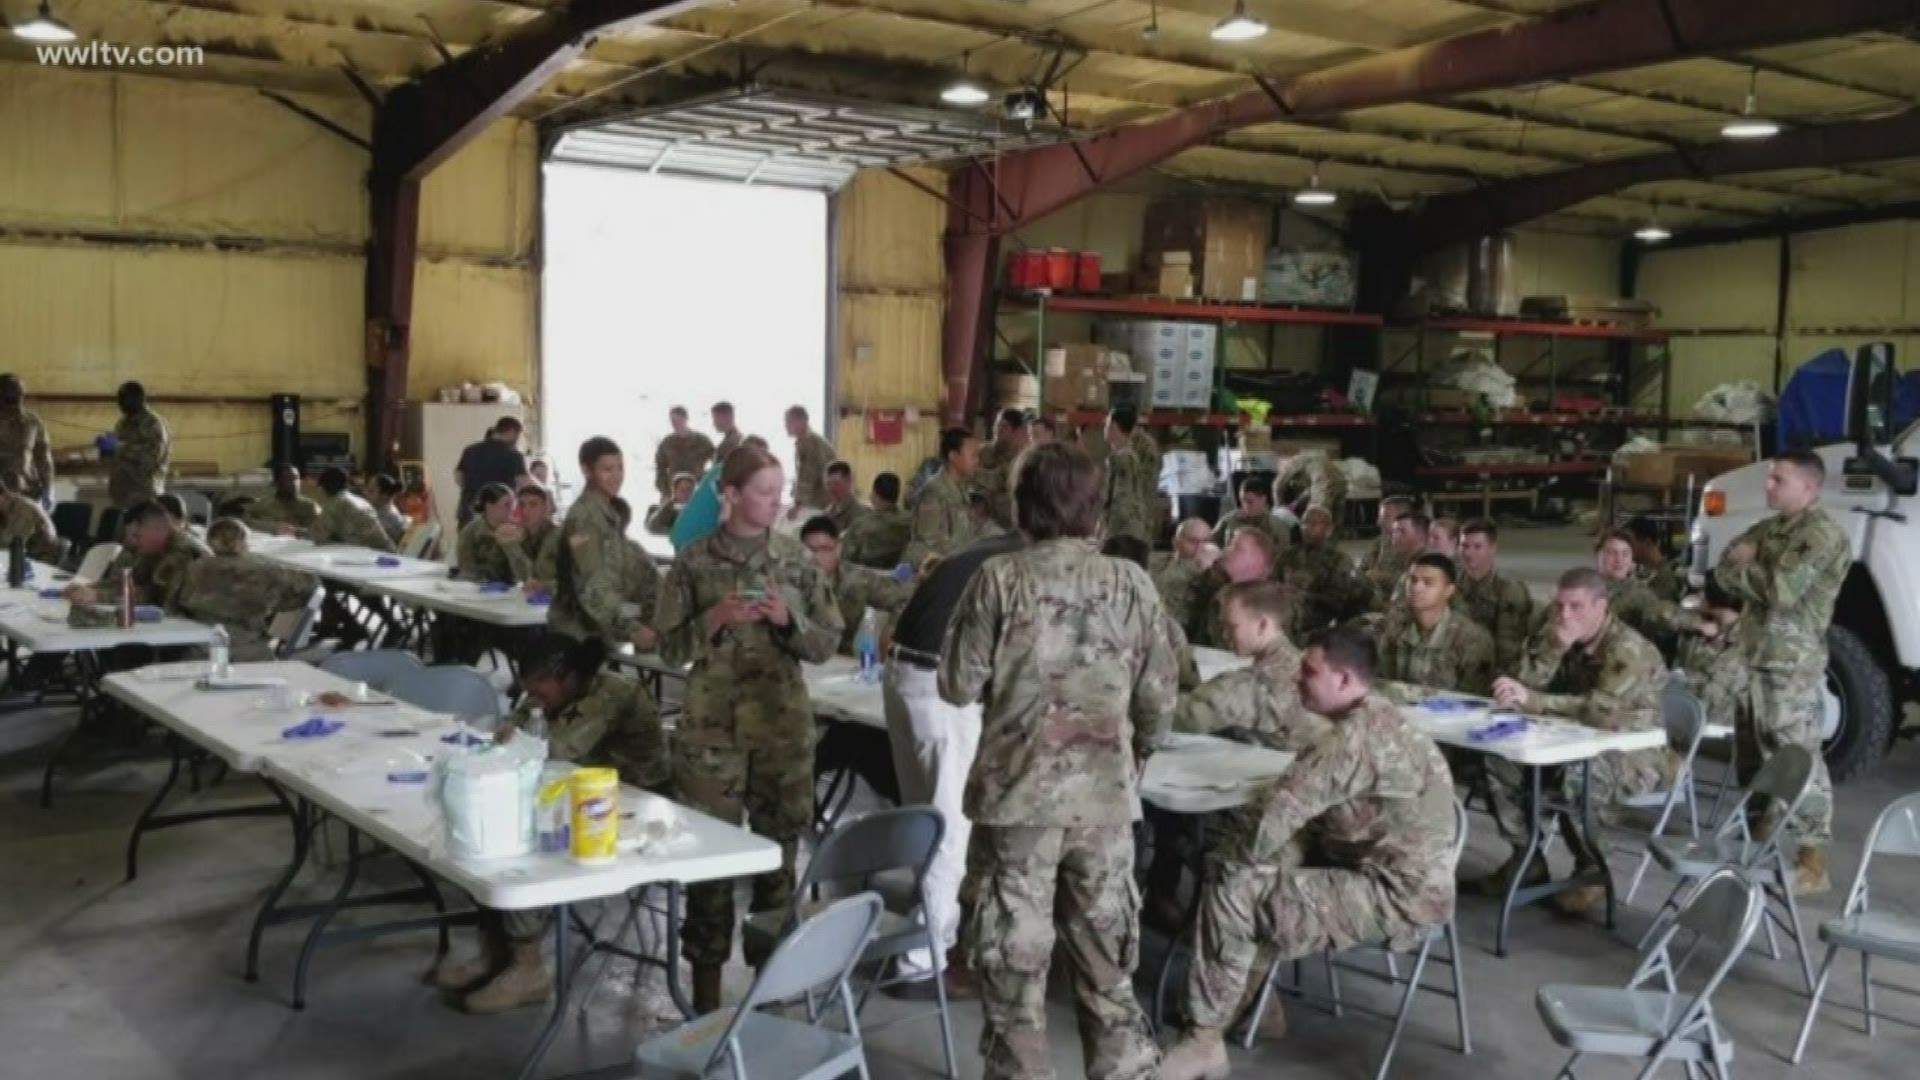 Nearly 100 soldiers and airmen have been activated to the New Orleans area, including 50 medics.